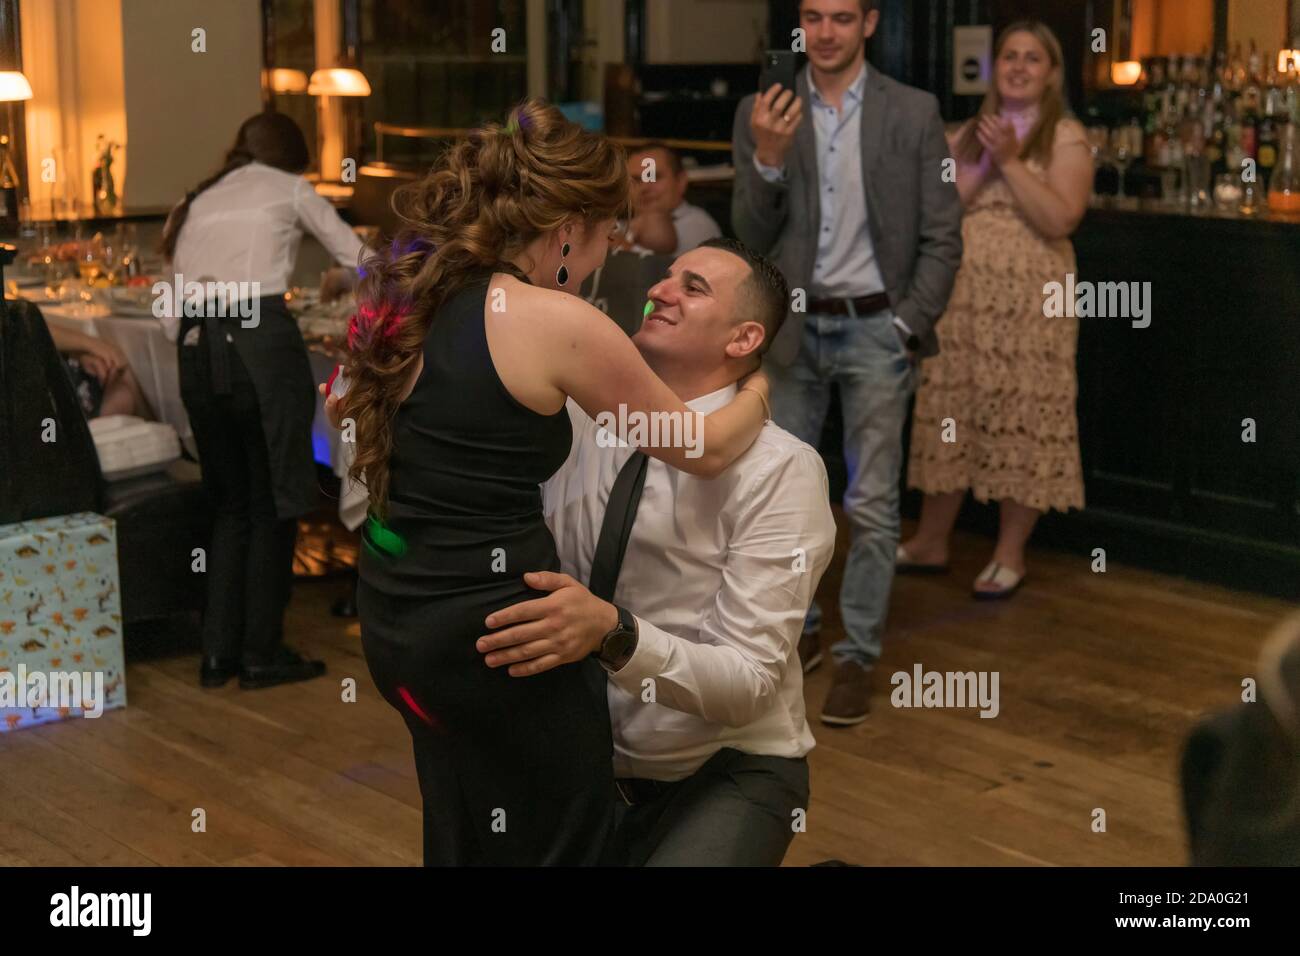 A man kneeling and proposing to a woman at the restaurant, London, UK Stock Photo